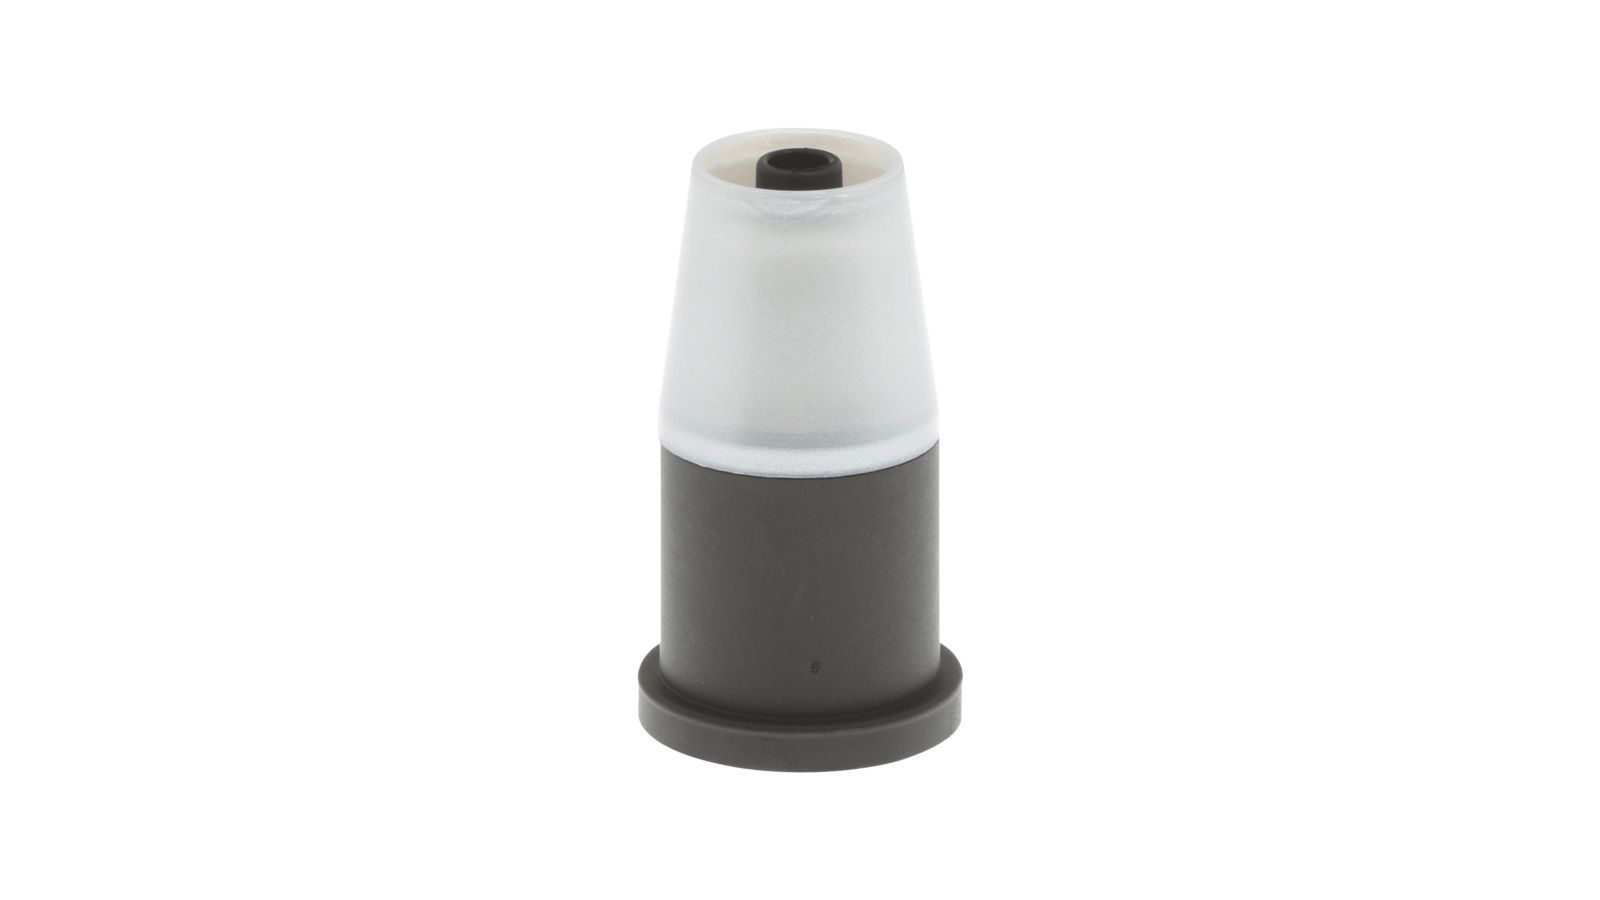 Nozzle for Bosch Siemens Coffee Makers - 00610972 BSH